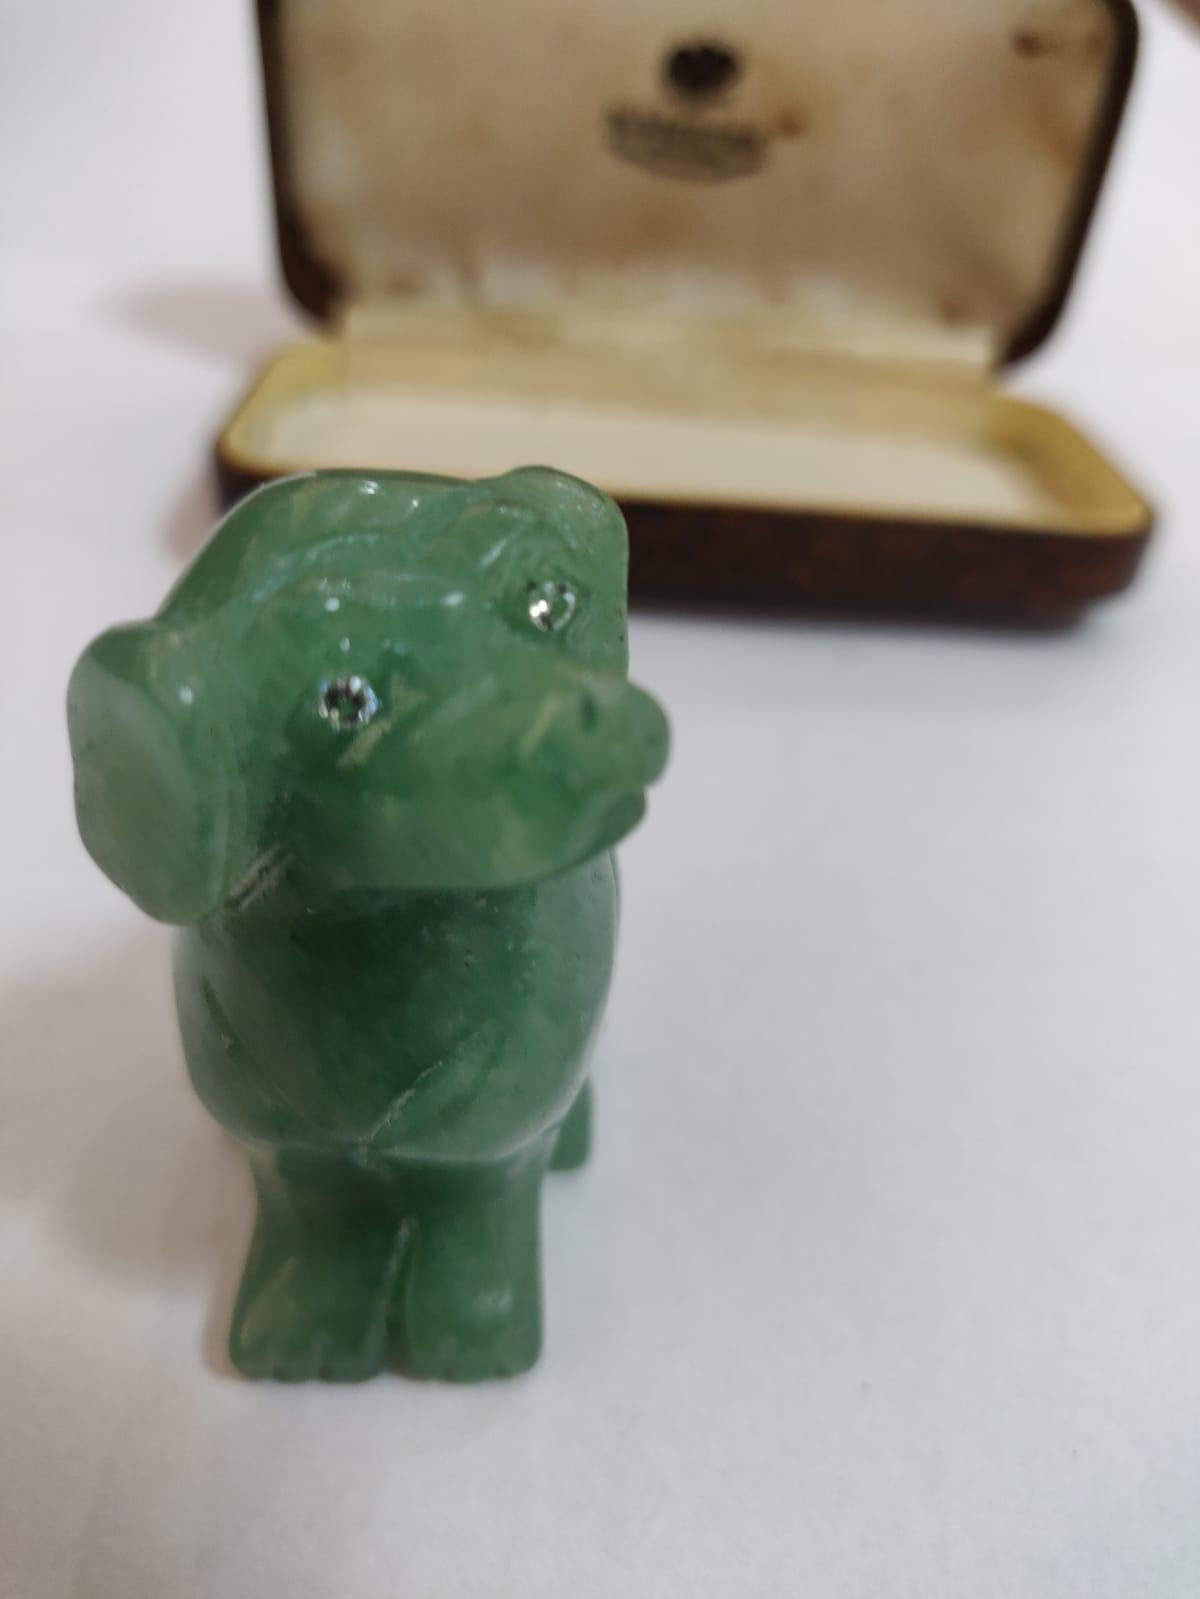 Antique Russian dog figurine made of natural Nephrite (jade) stone with diamond eyes by Karl Faberge. Come with original Faberge box.